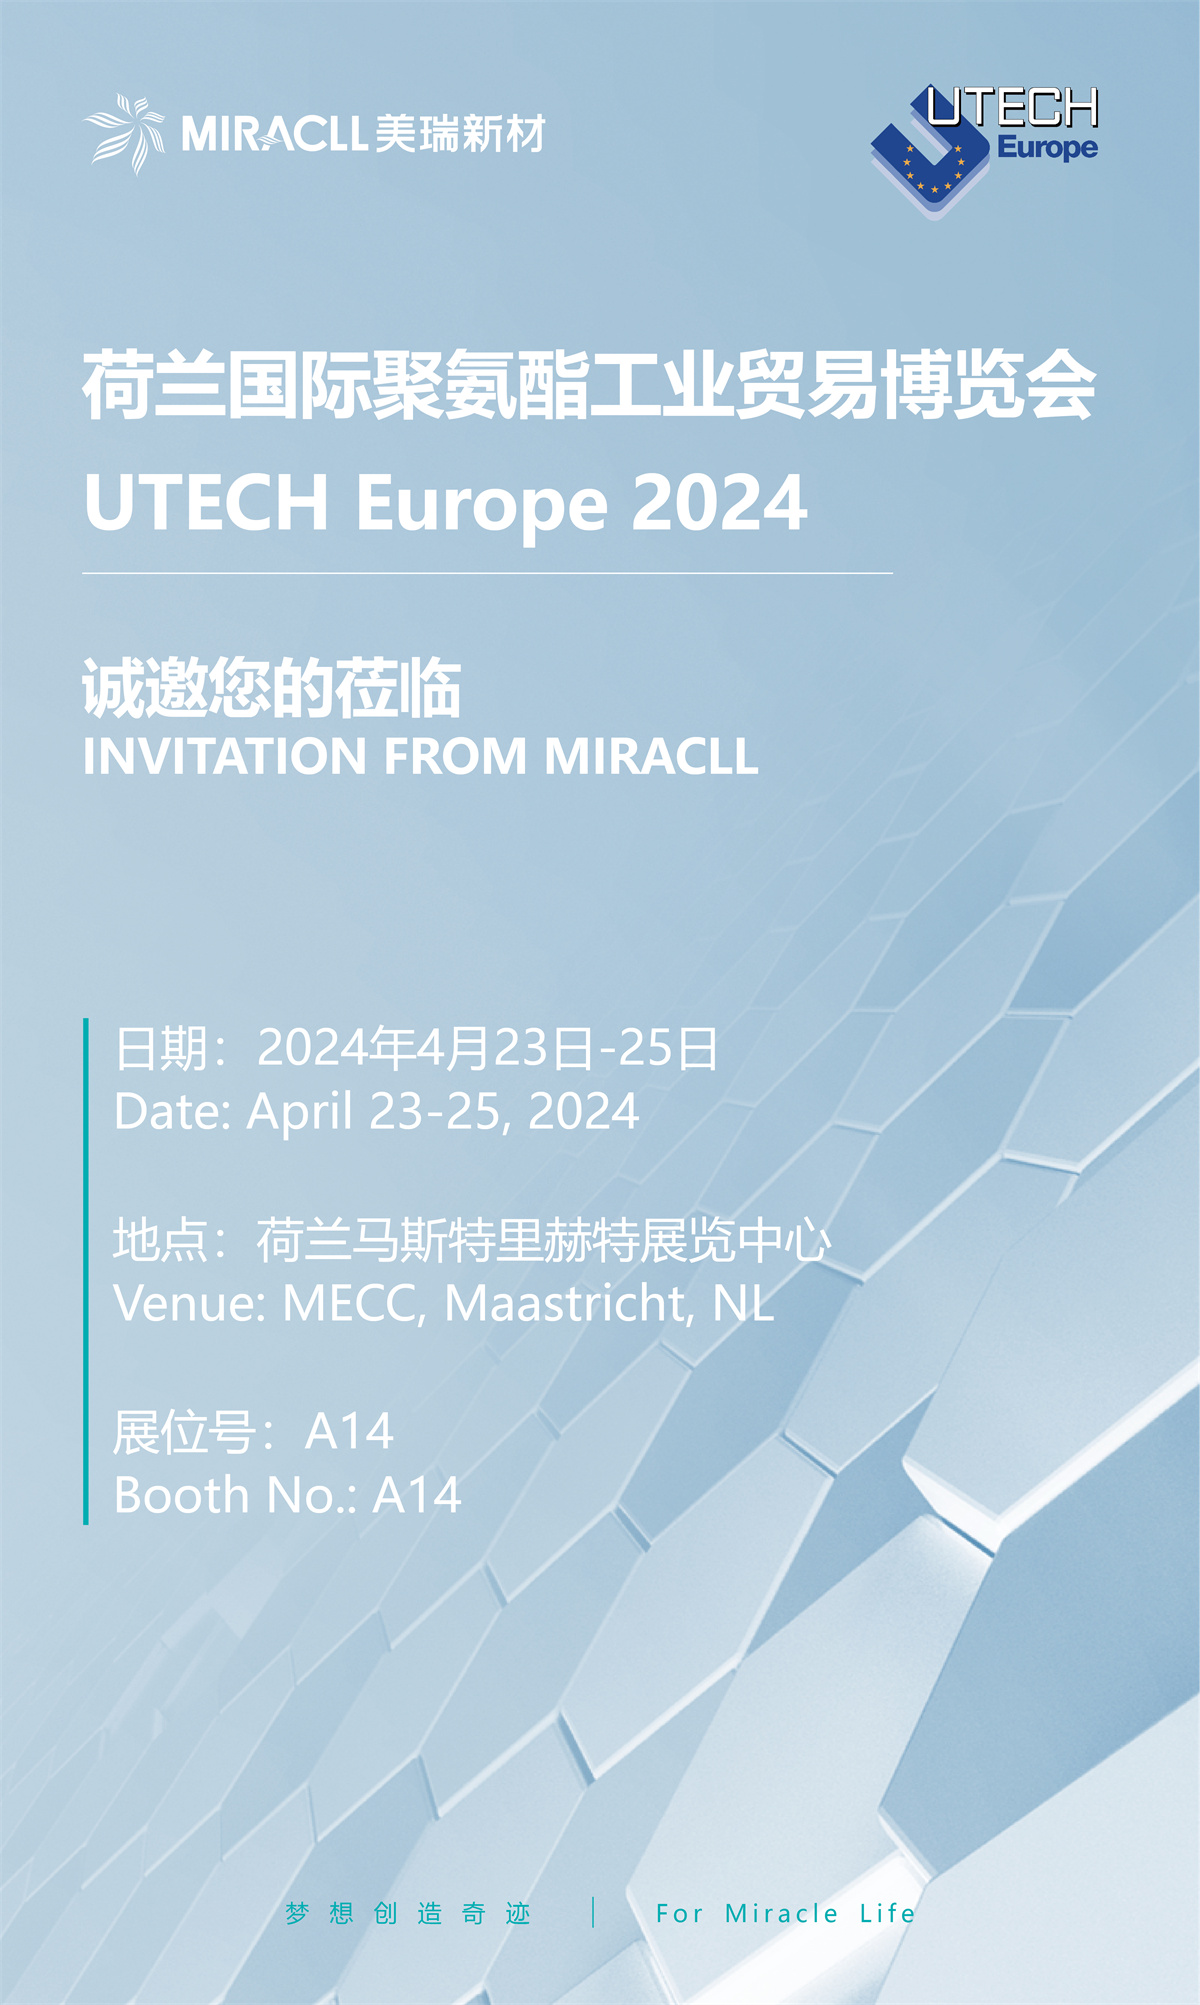 Invitation | Miracll Chemicals invites you to participate in UTECH Europe 2024